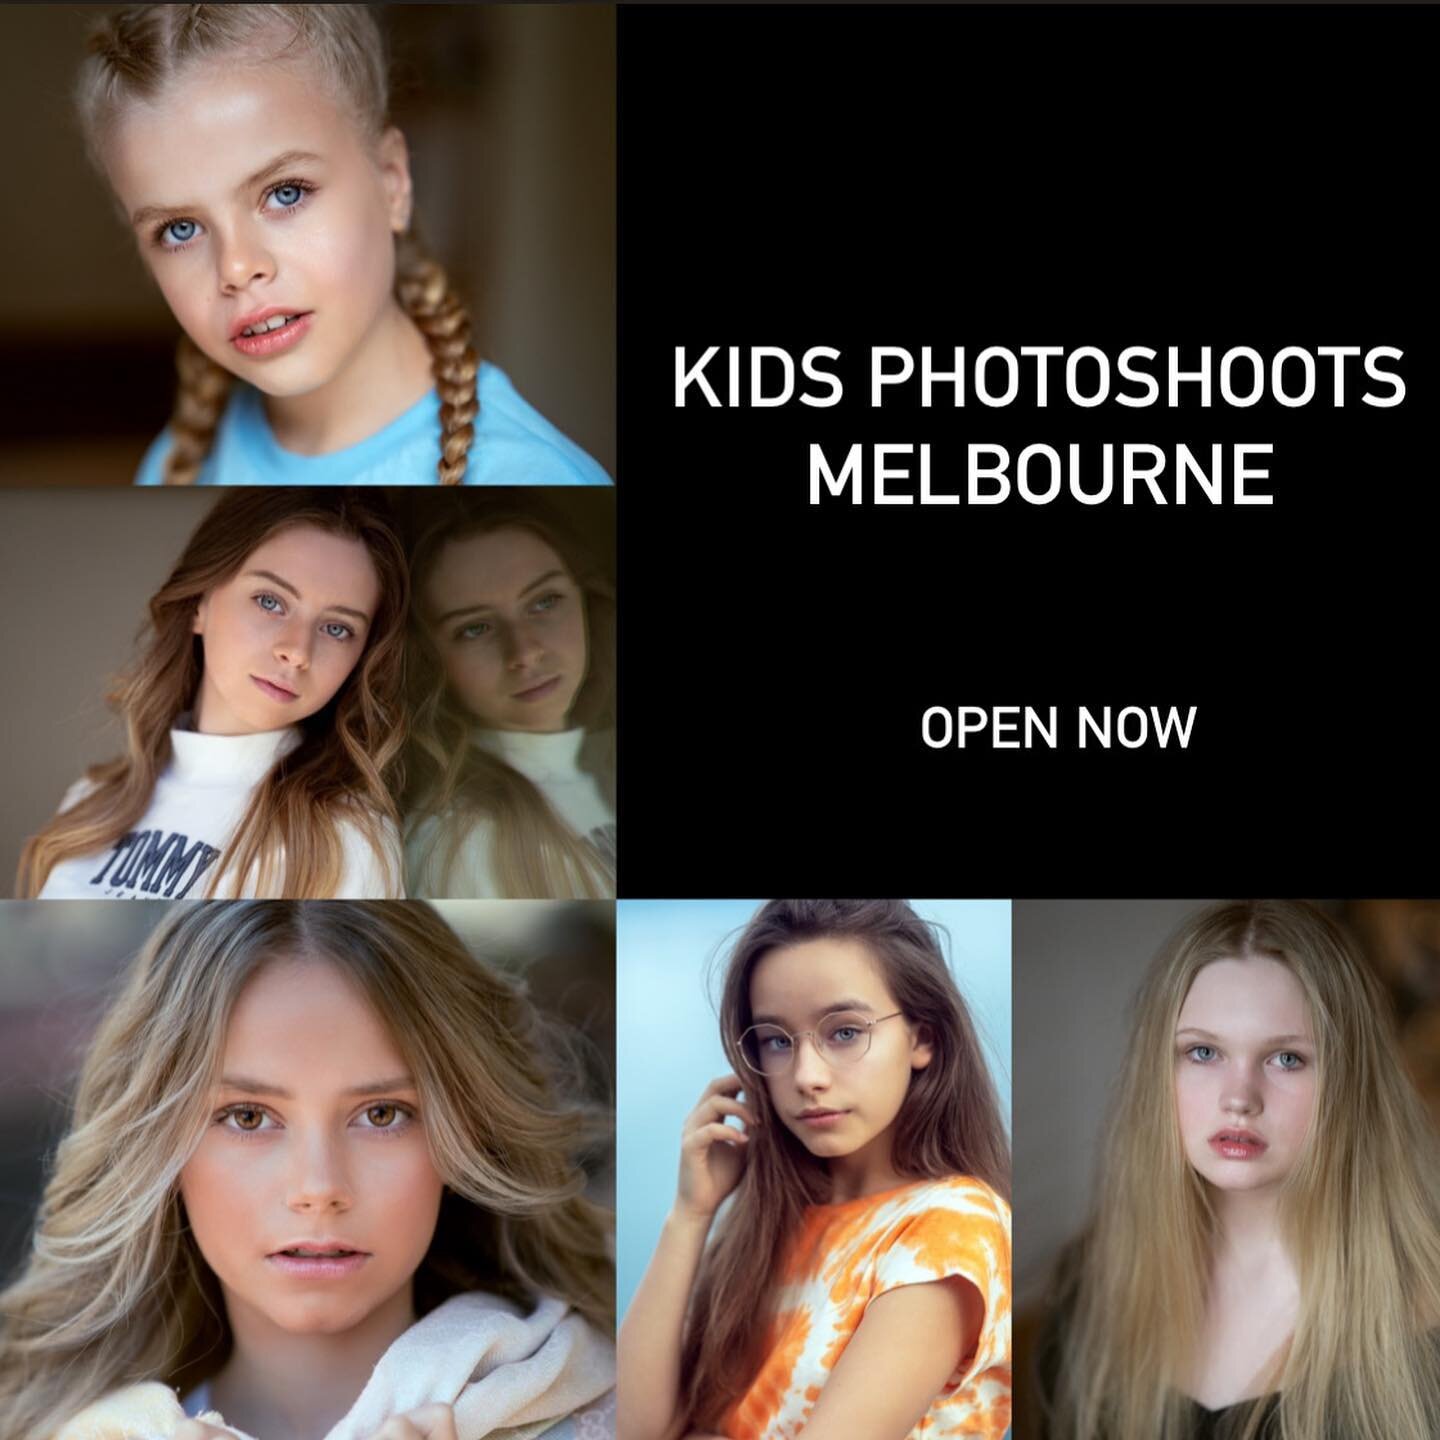 Melbourne people,

I am back and actively open for photoshoots now. Reach me out here or via Facebook https://facebook.com/mail2zaslam